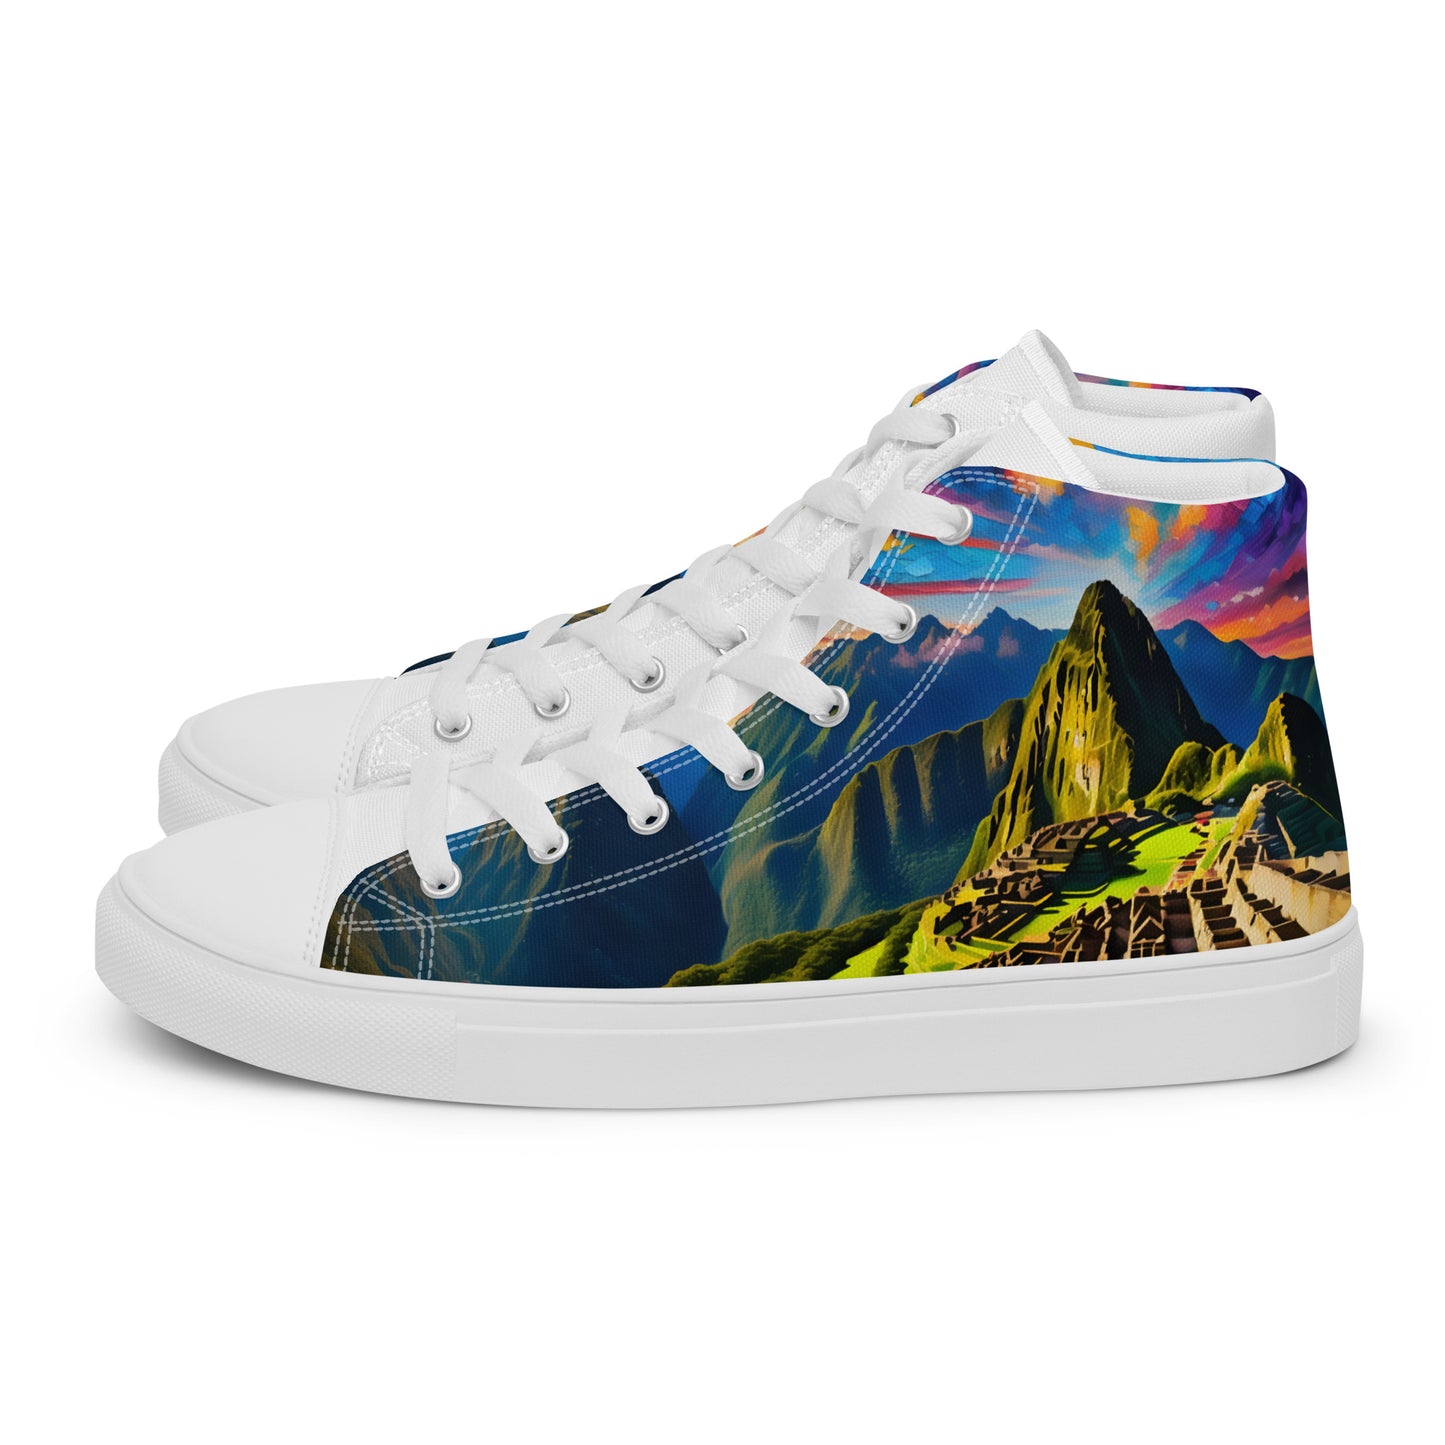 Machu Picchu - Stained glass - Women - White - High top shoes